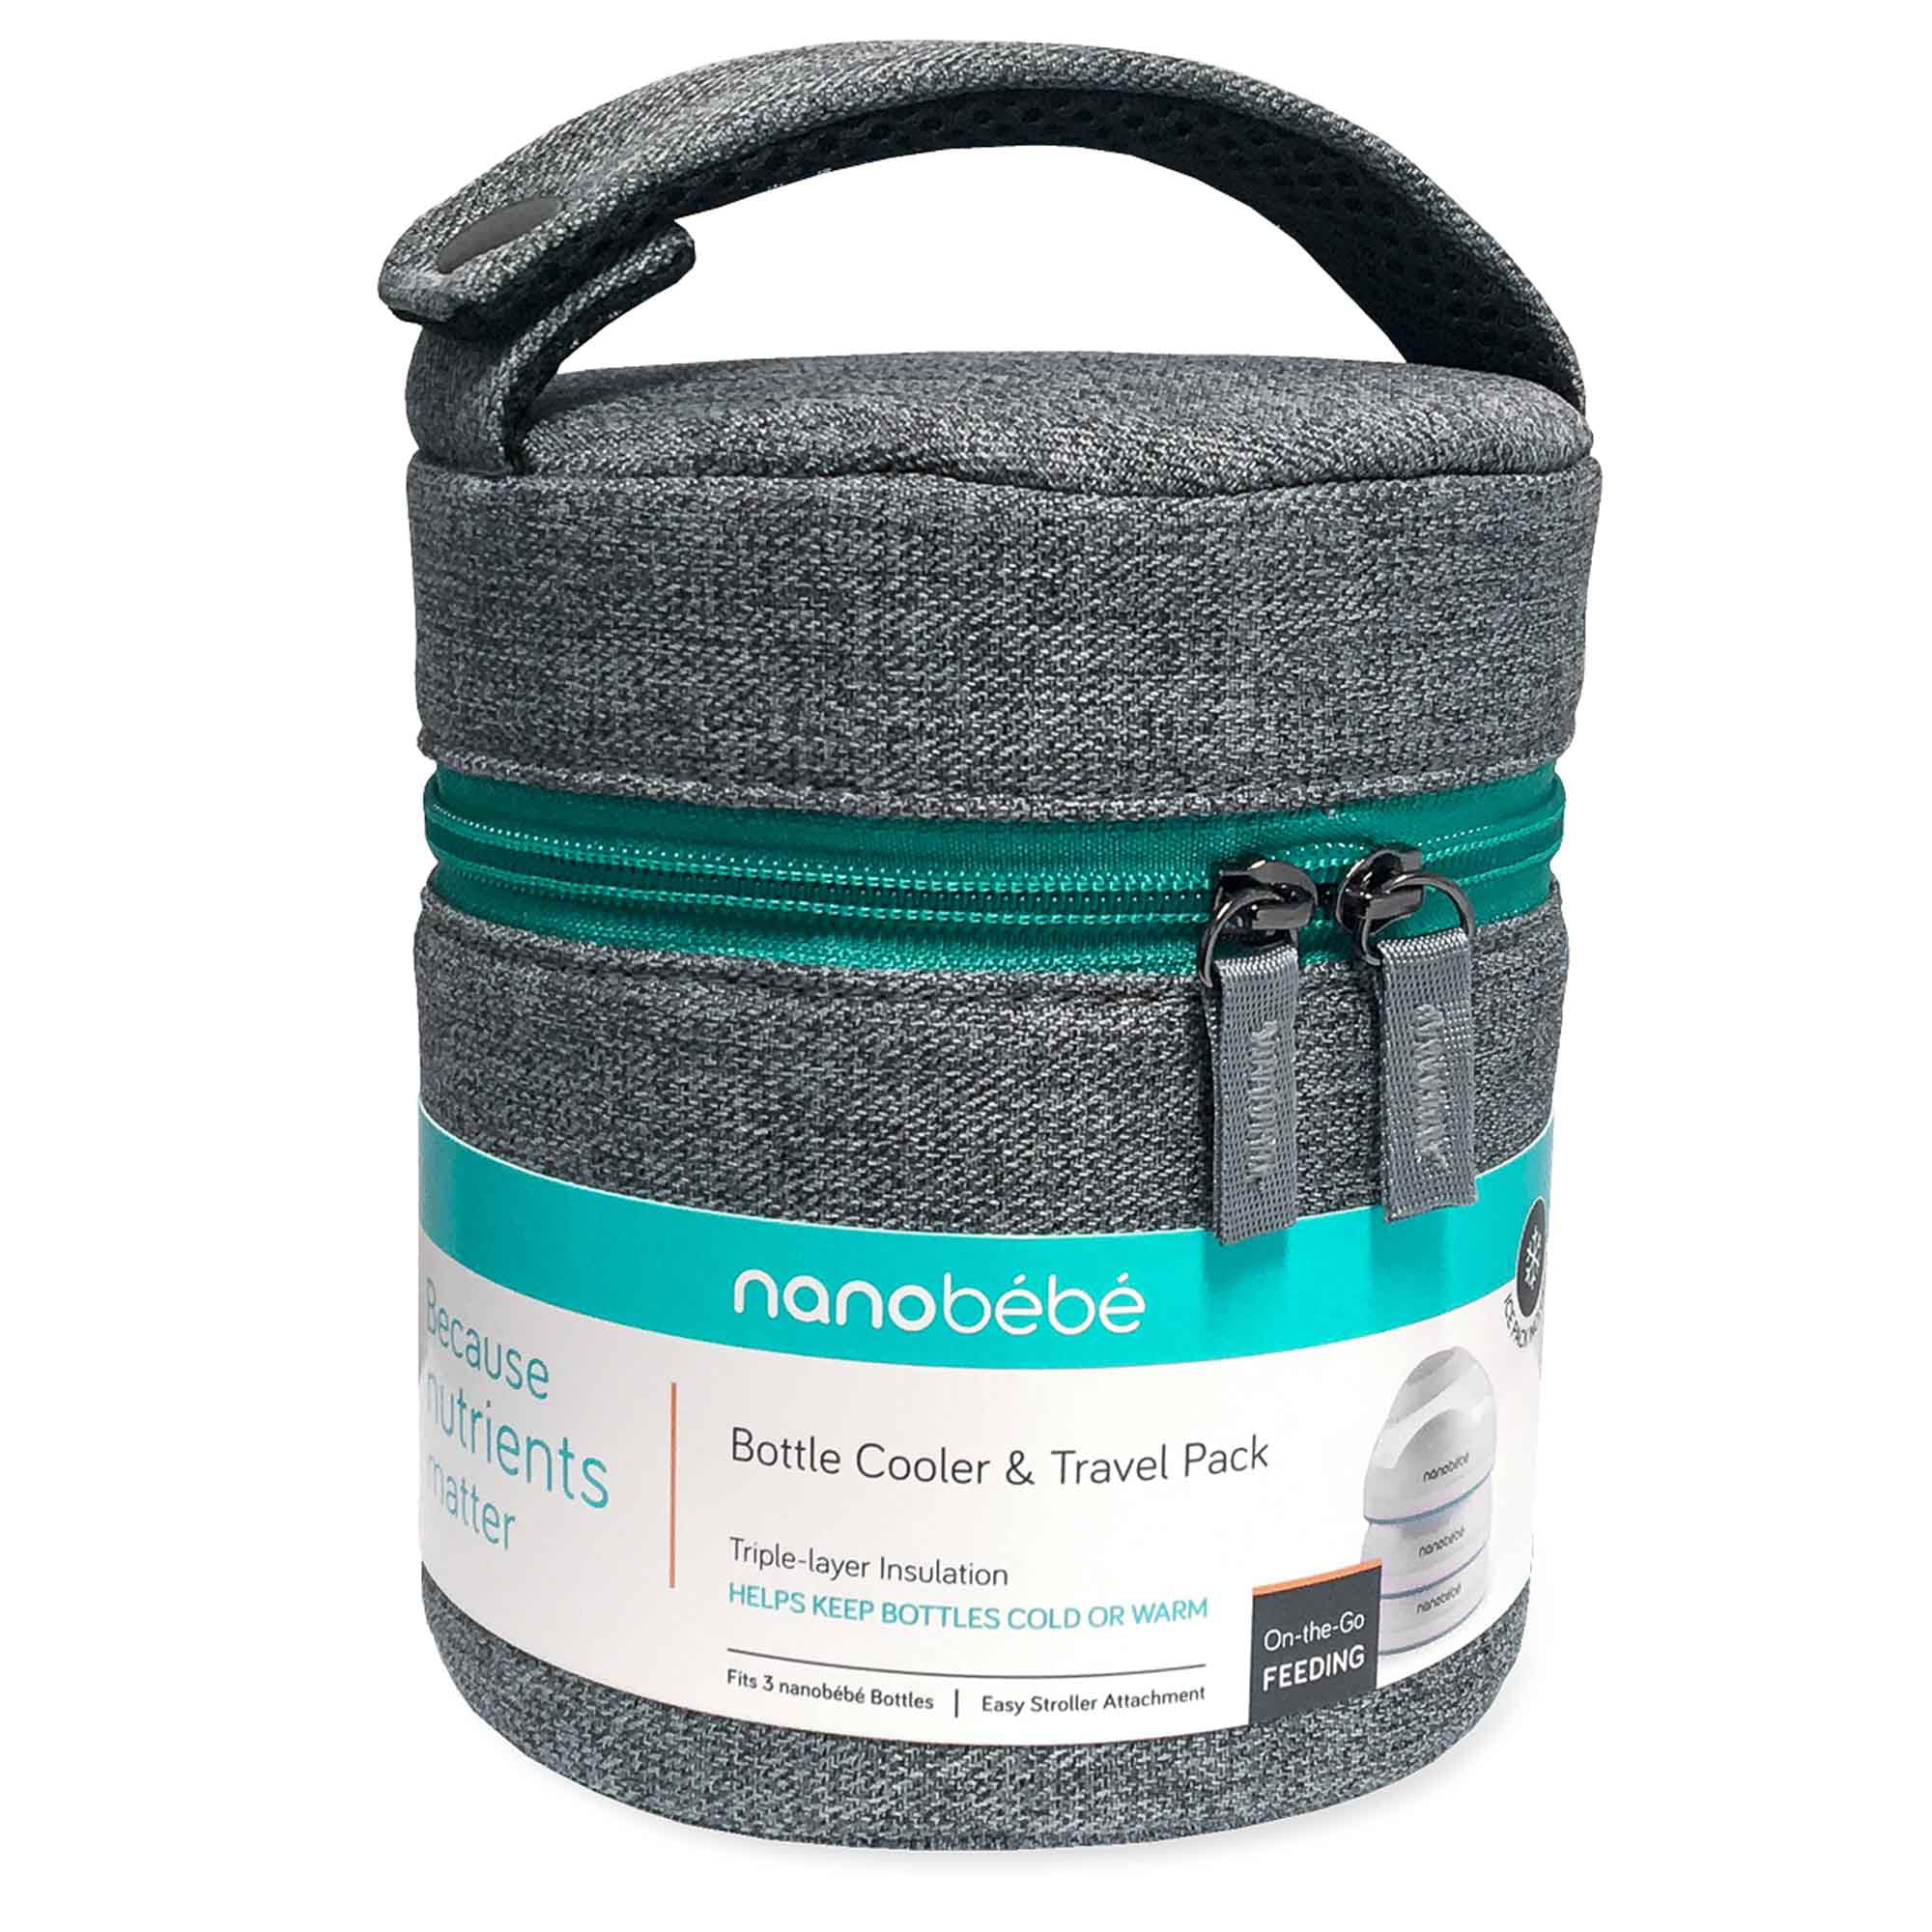 Grey Nanobebe Compact Triple Insulated Breastmilk Baby Bottle Cooler & Travel Bag with Ice Pack Included Easily attaches to Stroller or Diaper Bag 